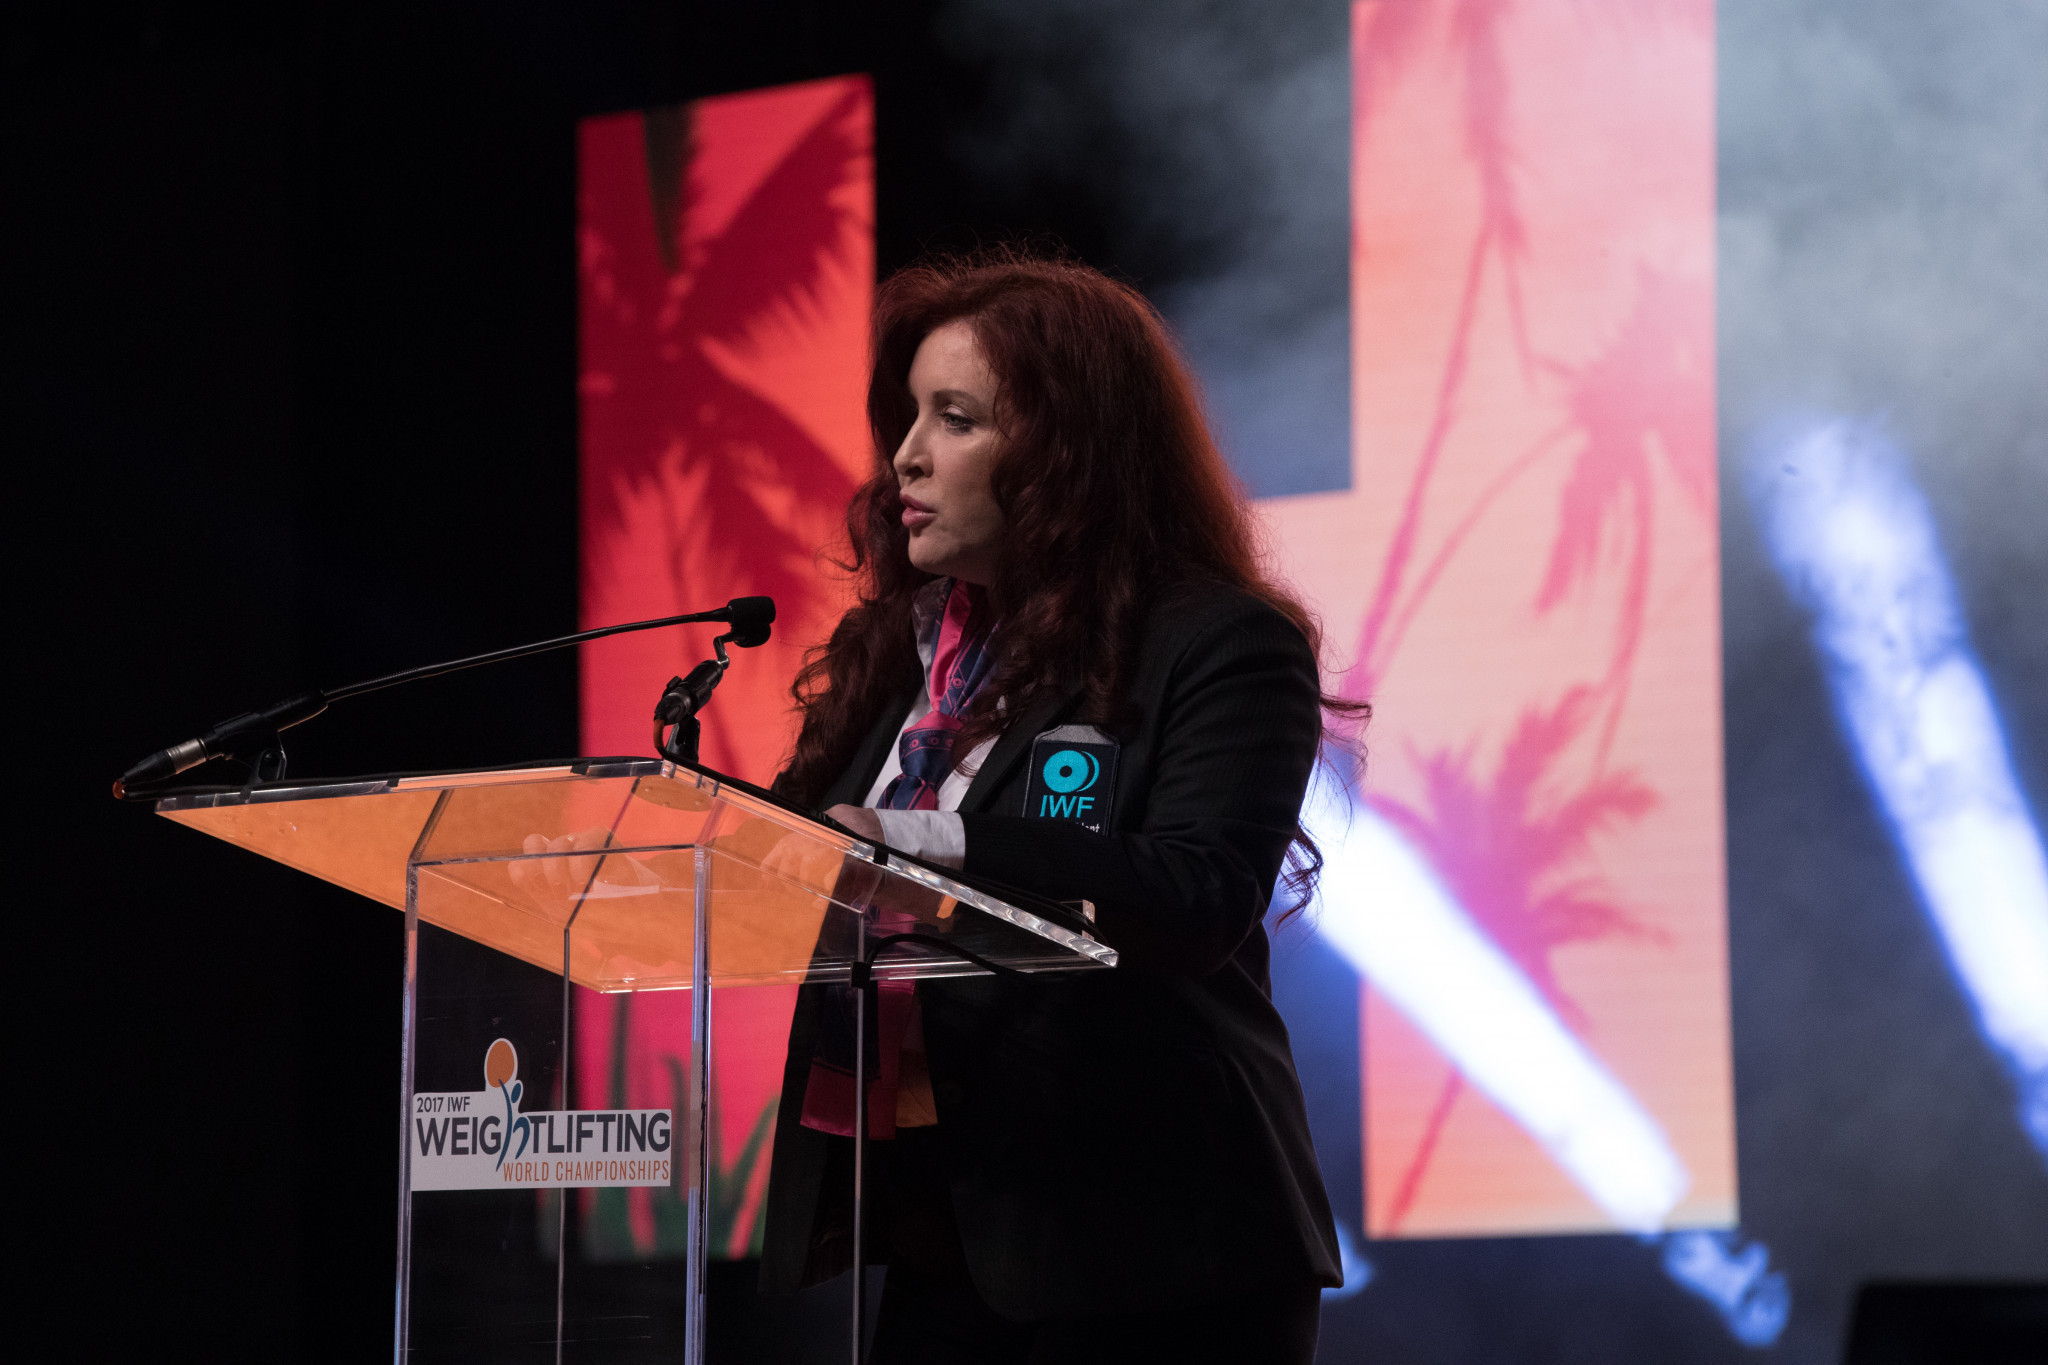 Exclusive: IWF Acting President Papandrea warned by USAW over "inappropriate" social media activity